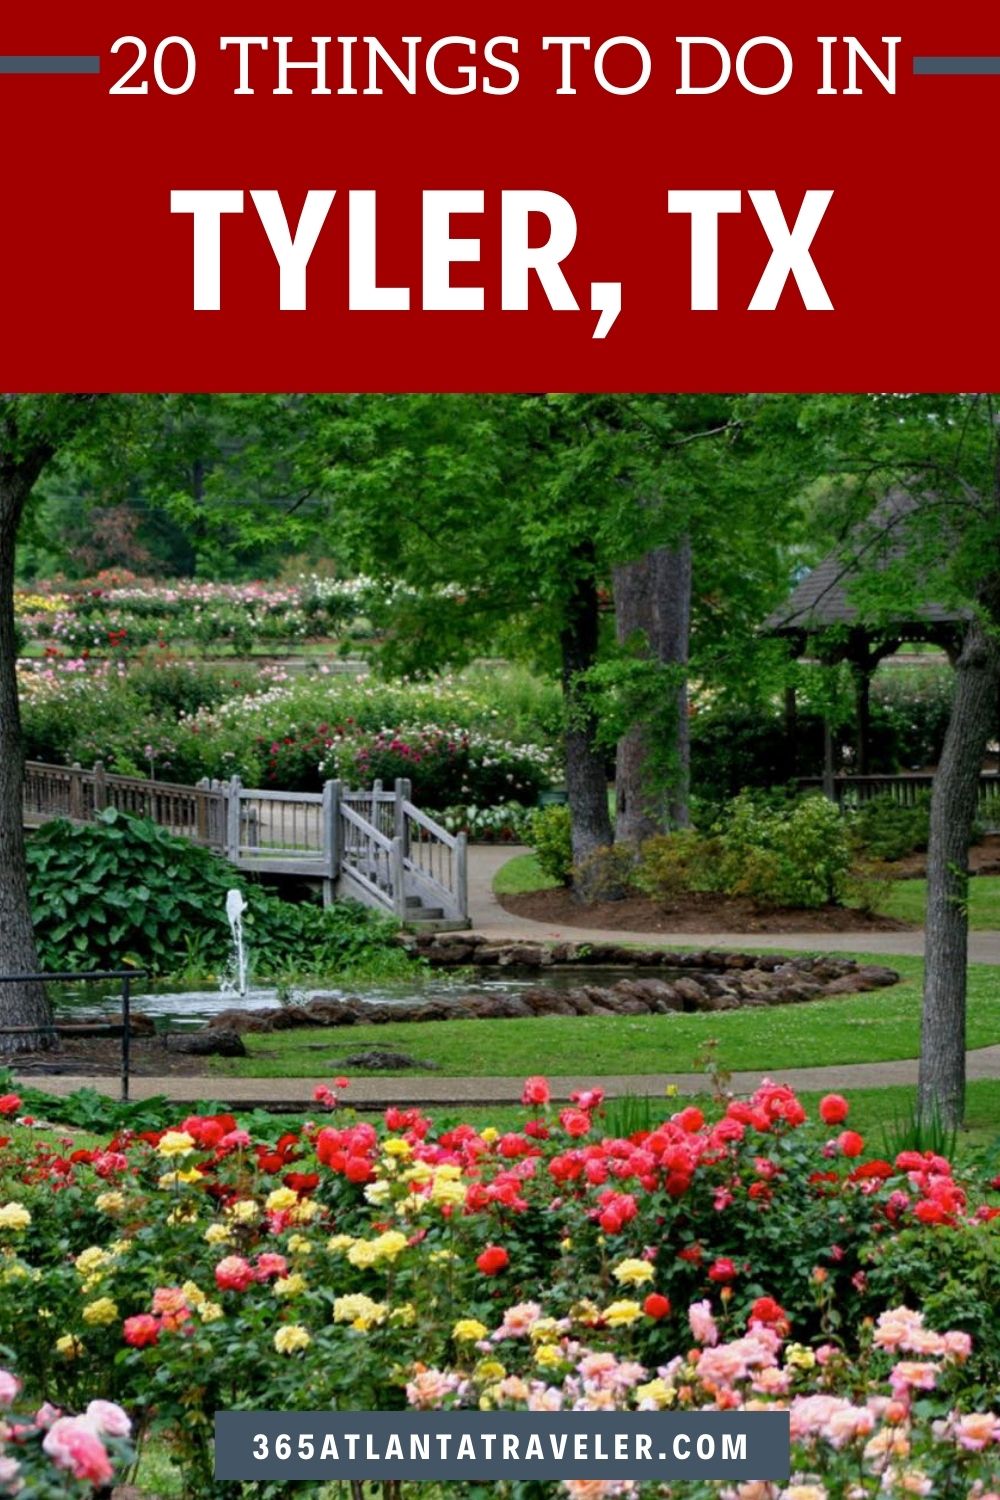 20 THINGS TO DO IN TYLER TX EVERYONE WILL LOVE